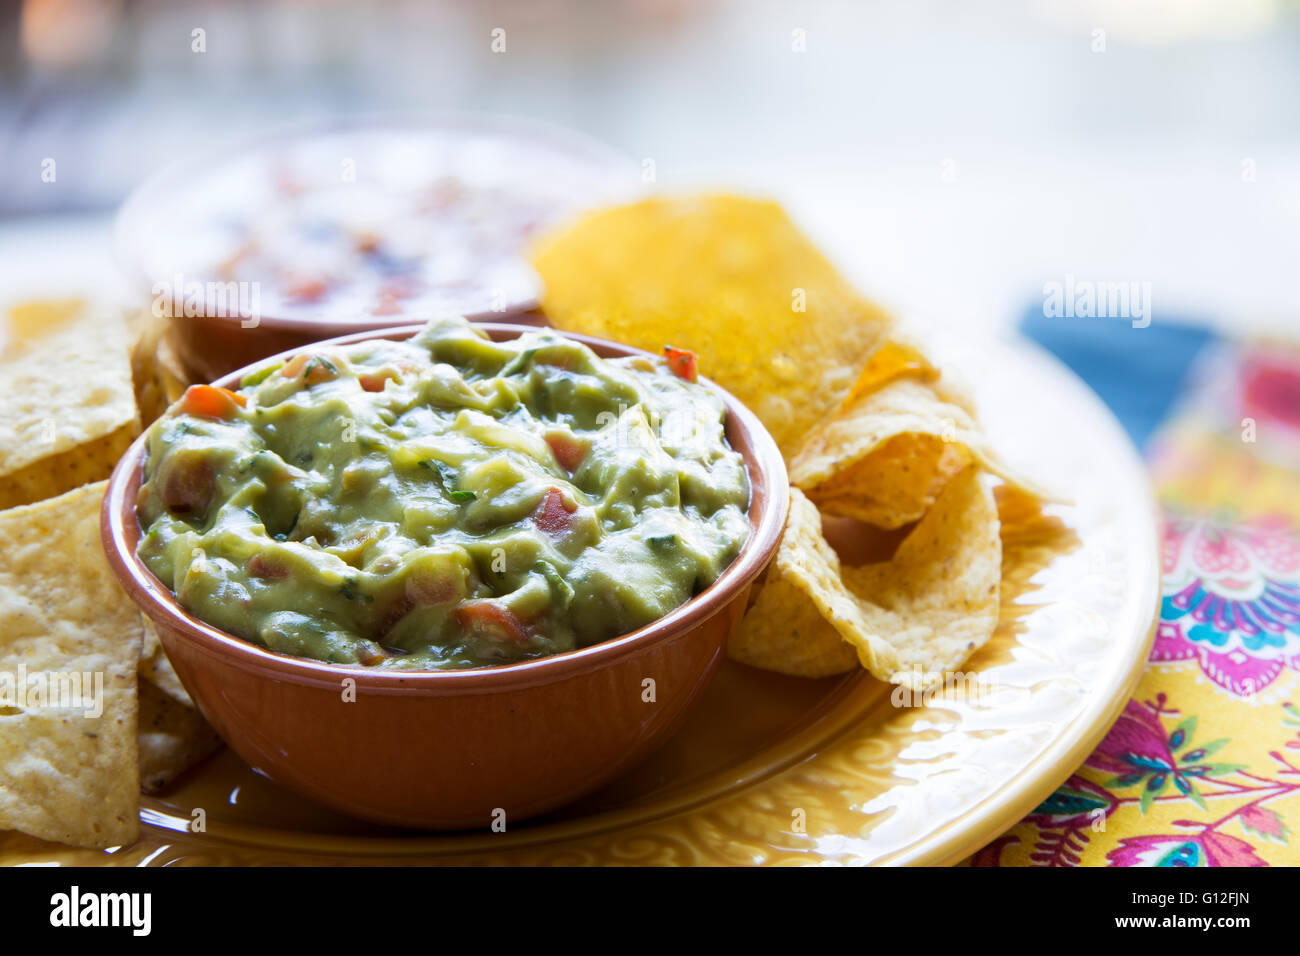 Fresh guacamole in a bowl with tortilla chips Stock Photo